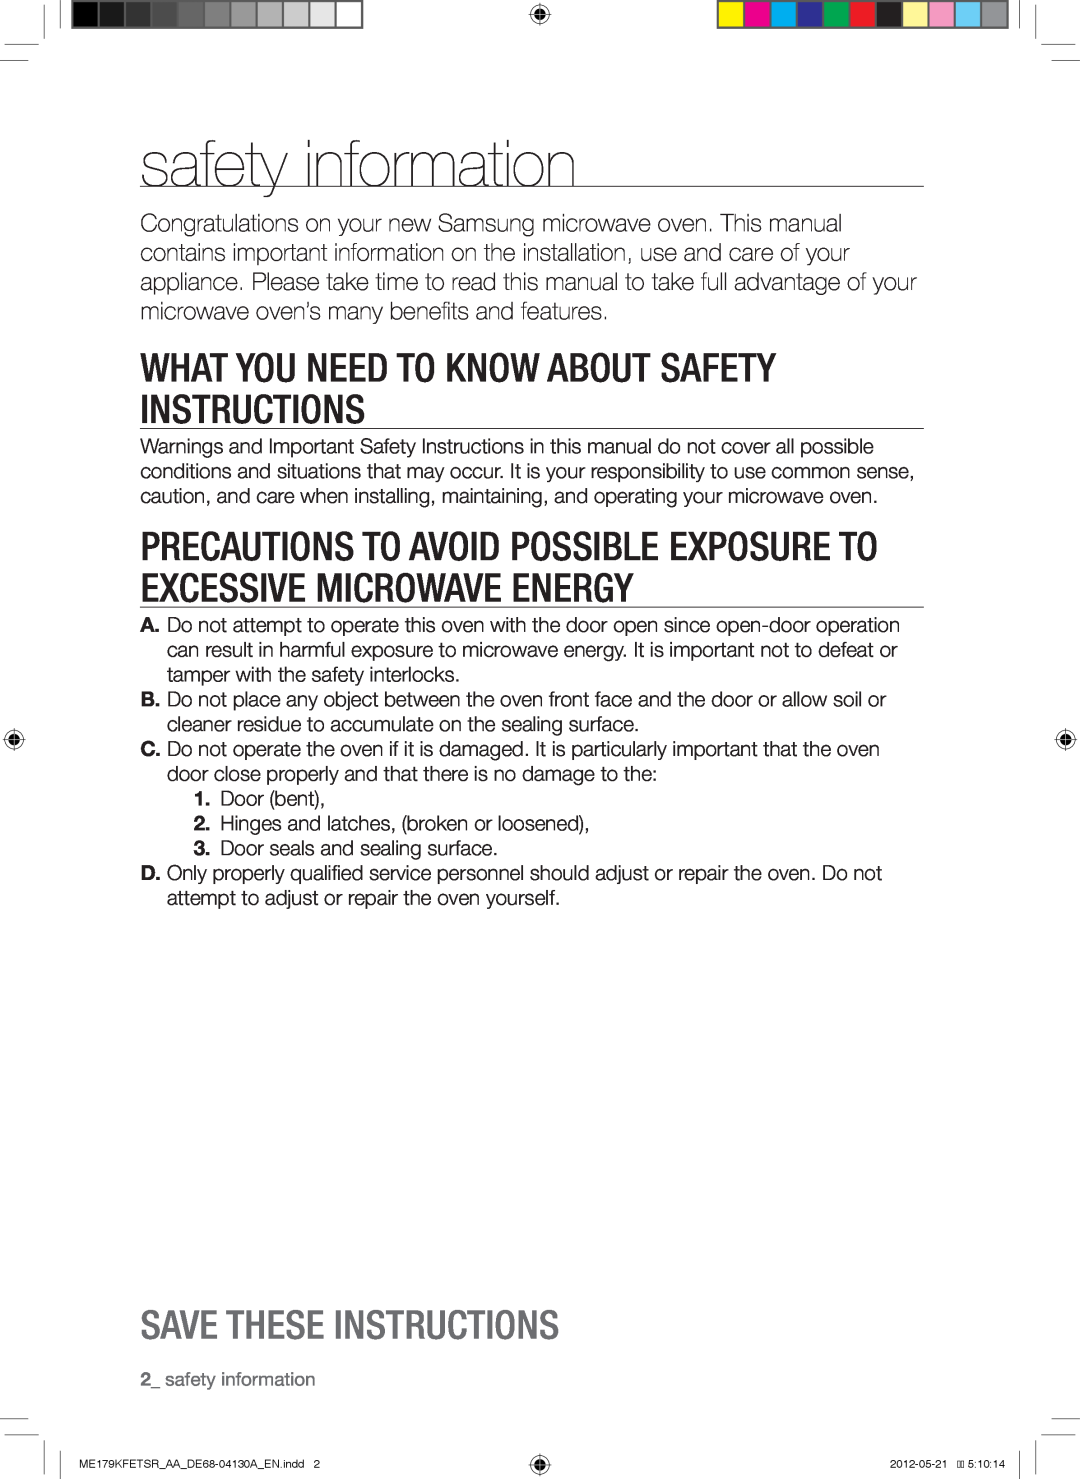 Samsung ME179KFETSR safety information, What You Need To Know About Safety Instructions, Save These Instructions 